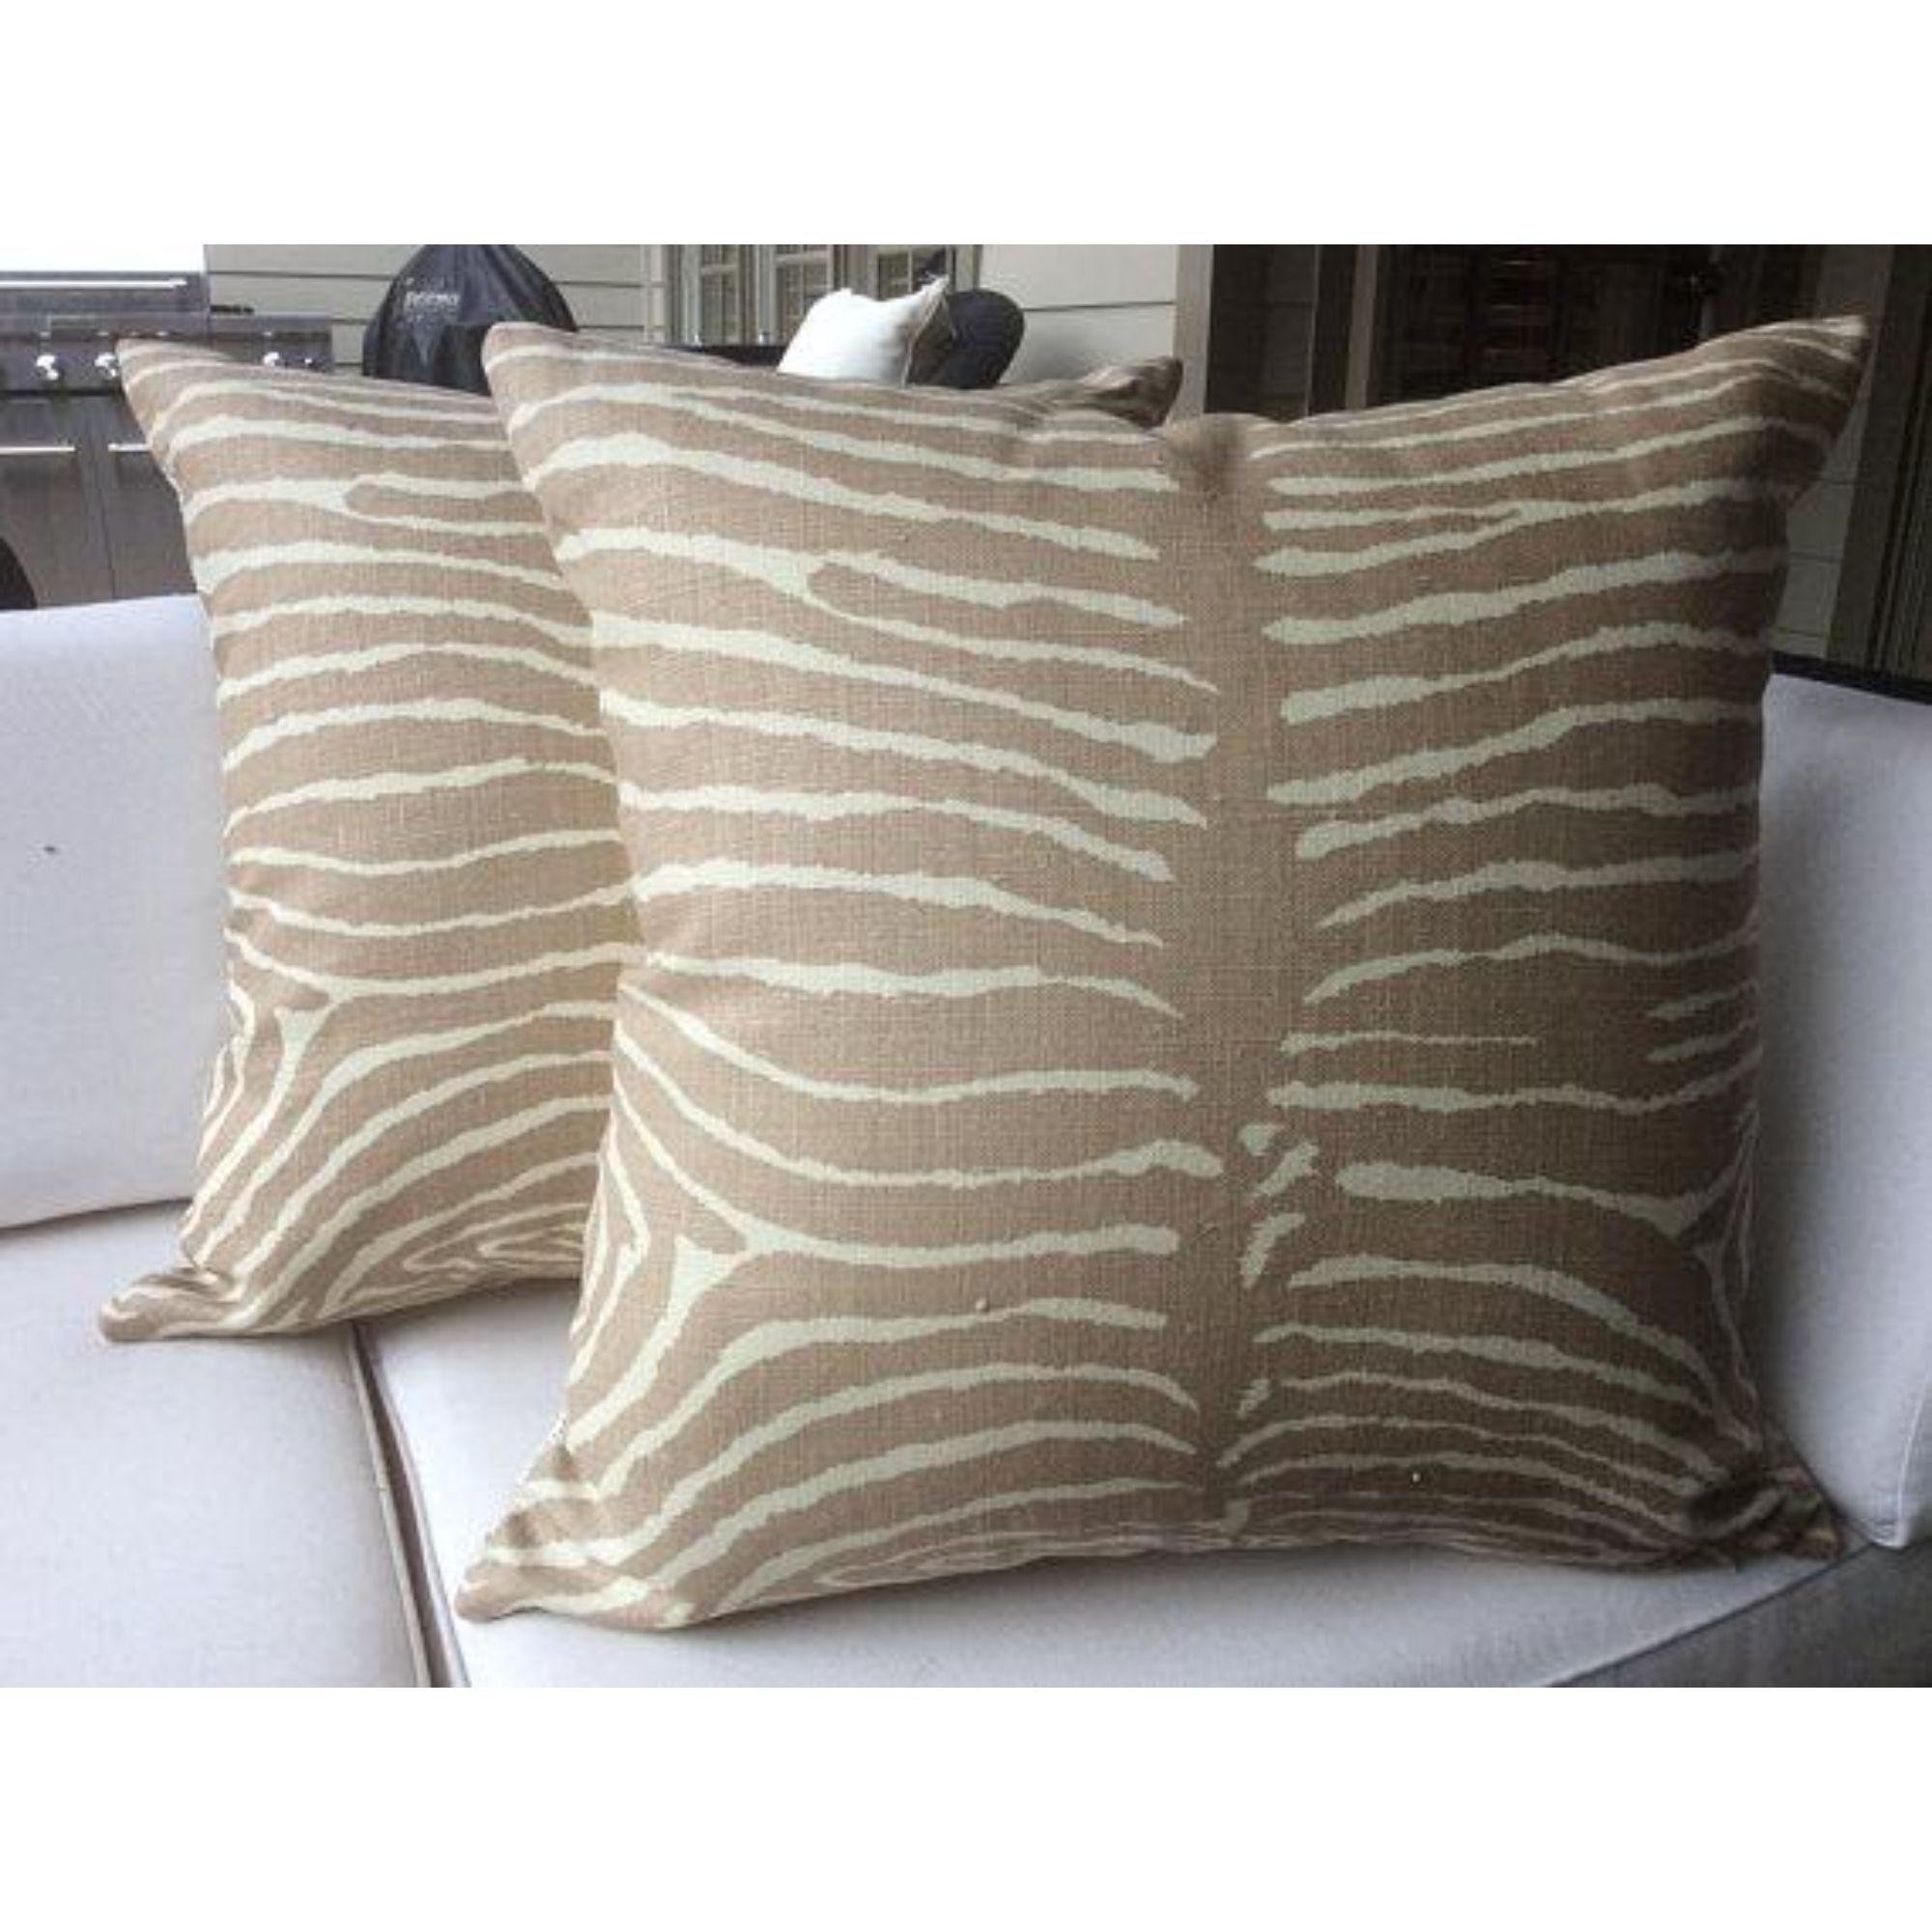 From Brunschwig and Fils comes this exotic zebra print in soft taupey tan and off white heavy linen fabric. My workroom has taken this and fashioned it into pillows, featuring coordinating linen backs and an invisible zippers.

The official colorway